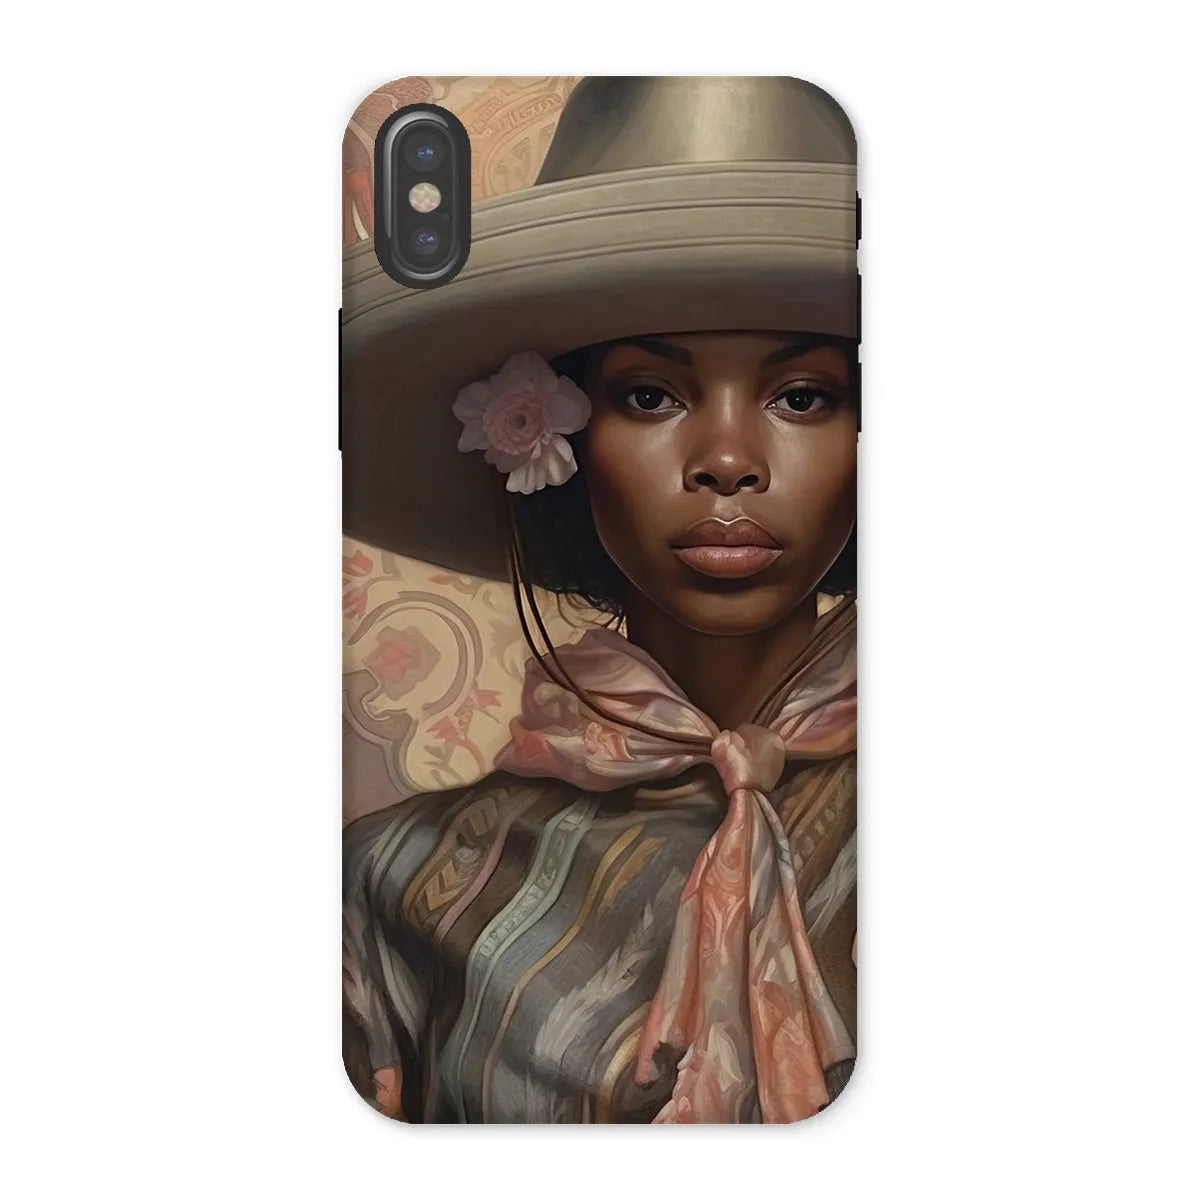 Sadie The Lesbian Cowgirl - Sapphic Art Phone Case - Iphone x / Matte - Mobile Phone Cases - Aesthetic Art